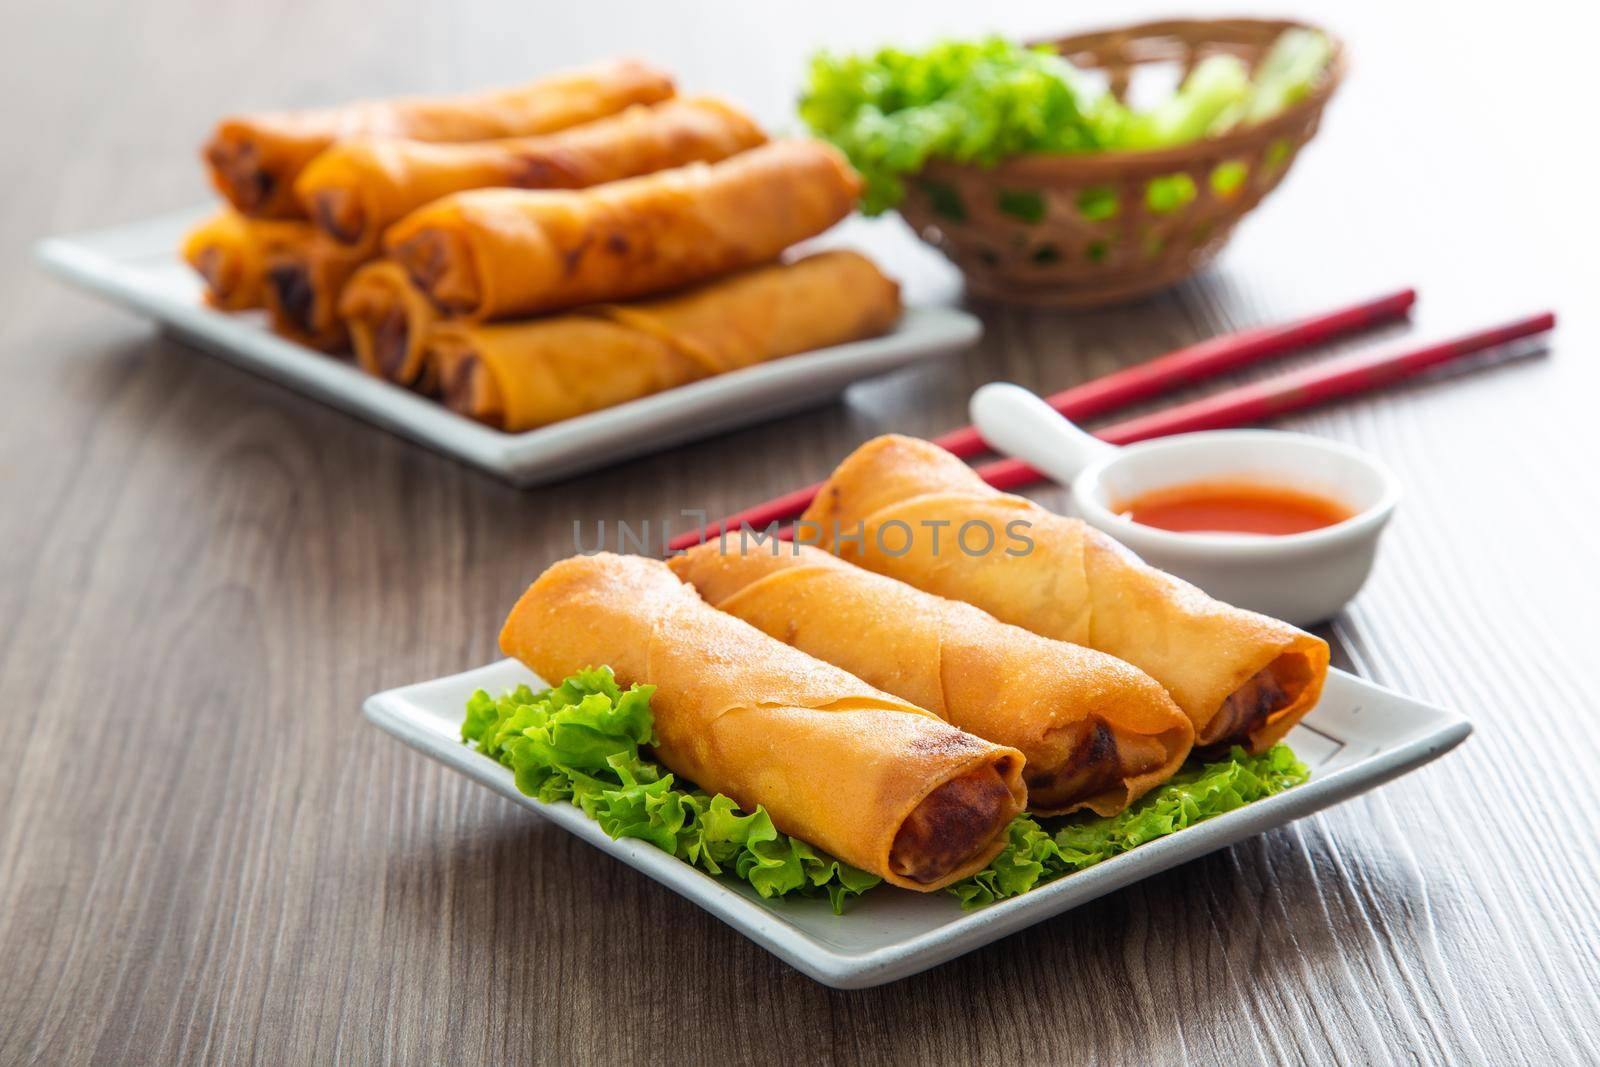 Popiah, deep fried spring rolls by tehcheesiong